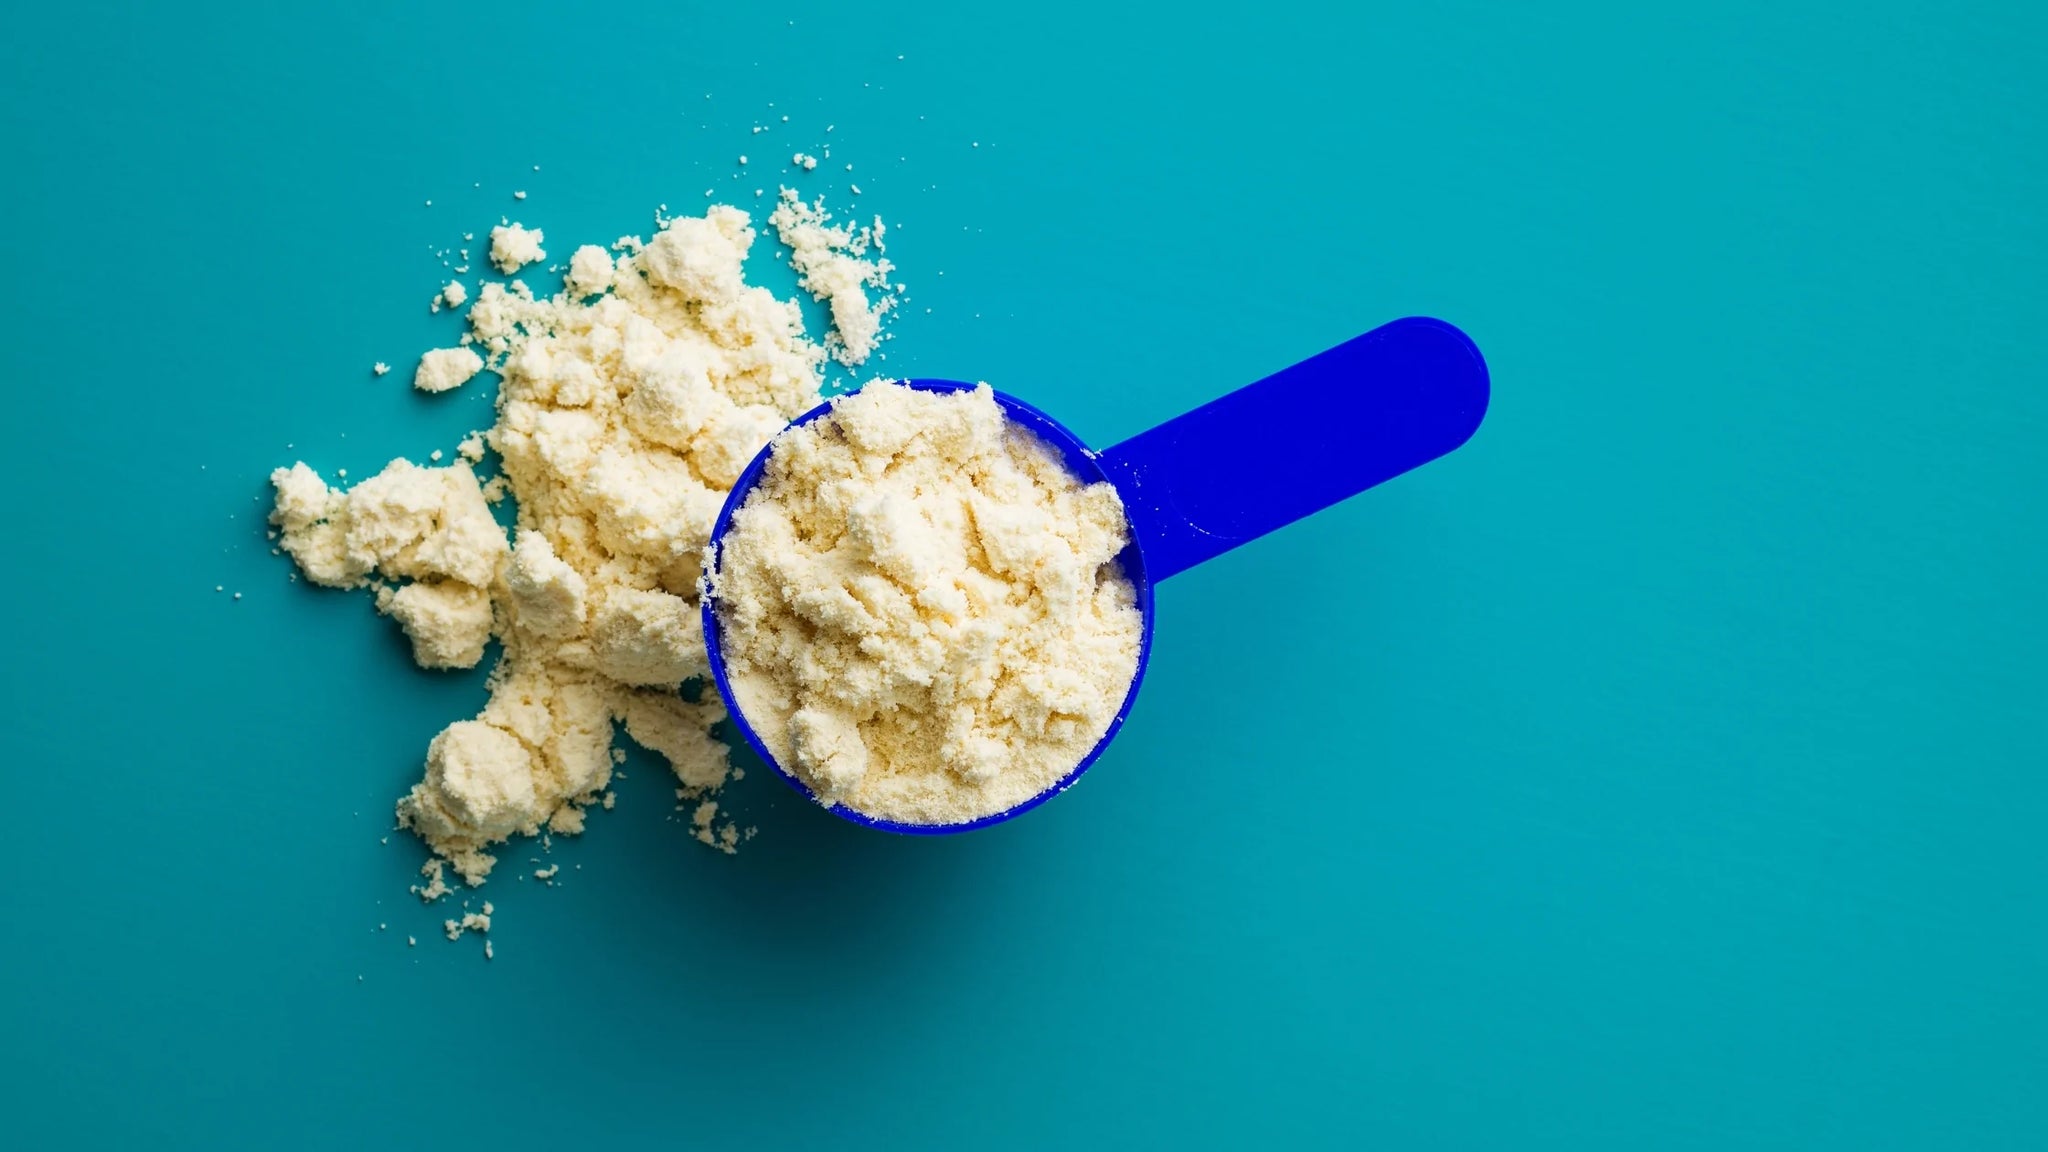 The Truth About Whey Protein & 5 Plant-Based Alternatives